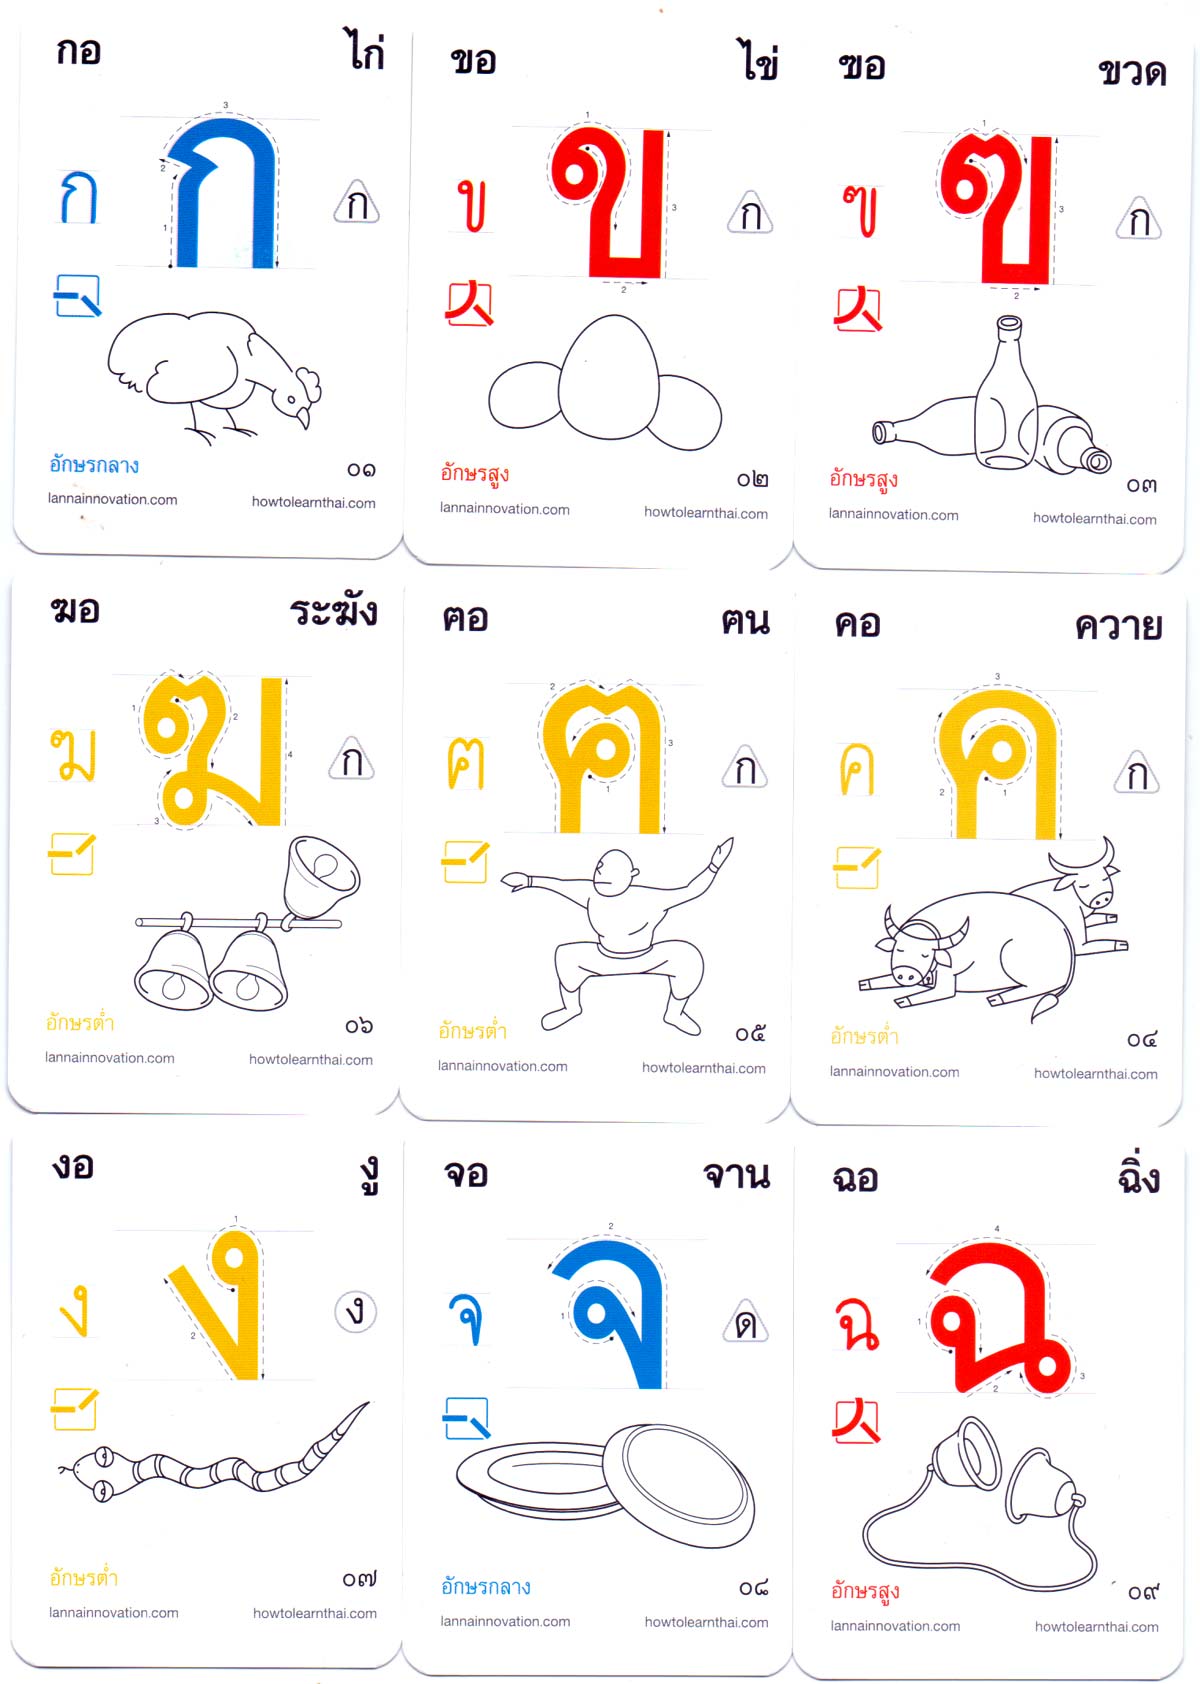 “Learn Thai” cards published by Lanna Innovation Co. Ltd, 2009